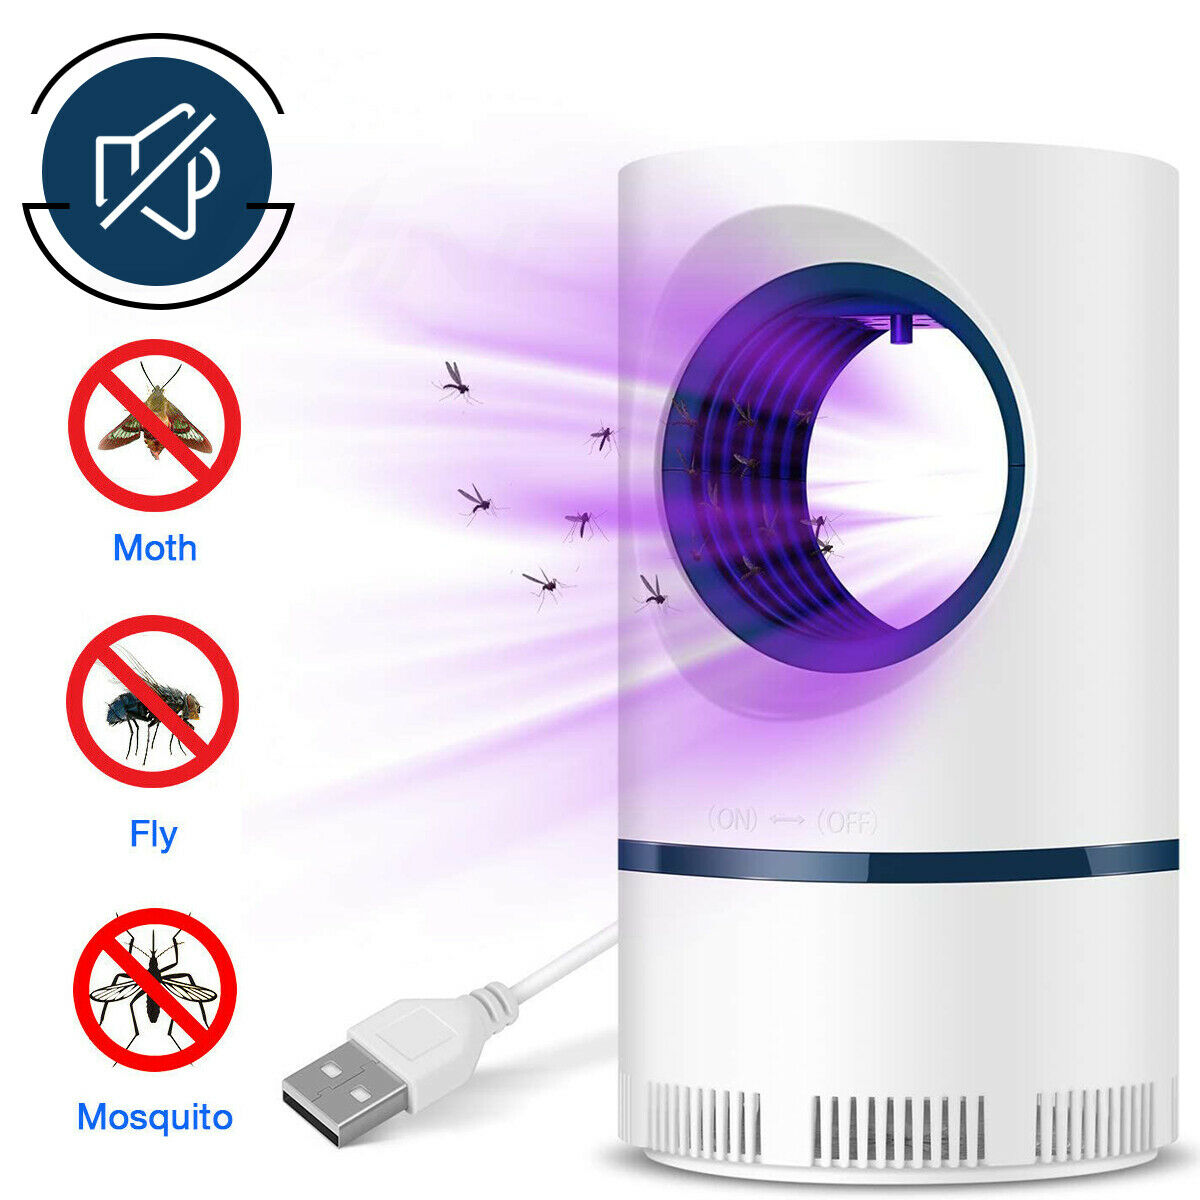 Electric Mosquito Insect Killer Zapper Uv Light Fly Bug Trap Pest Control Lamp